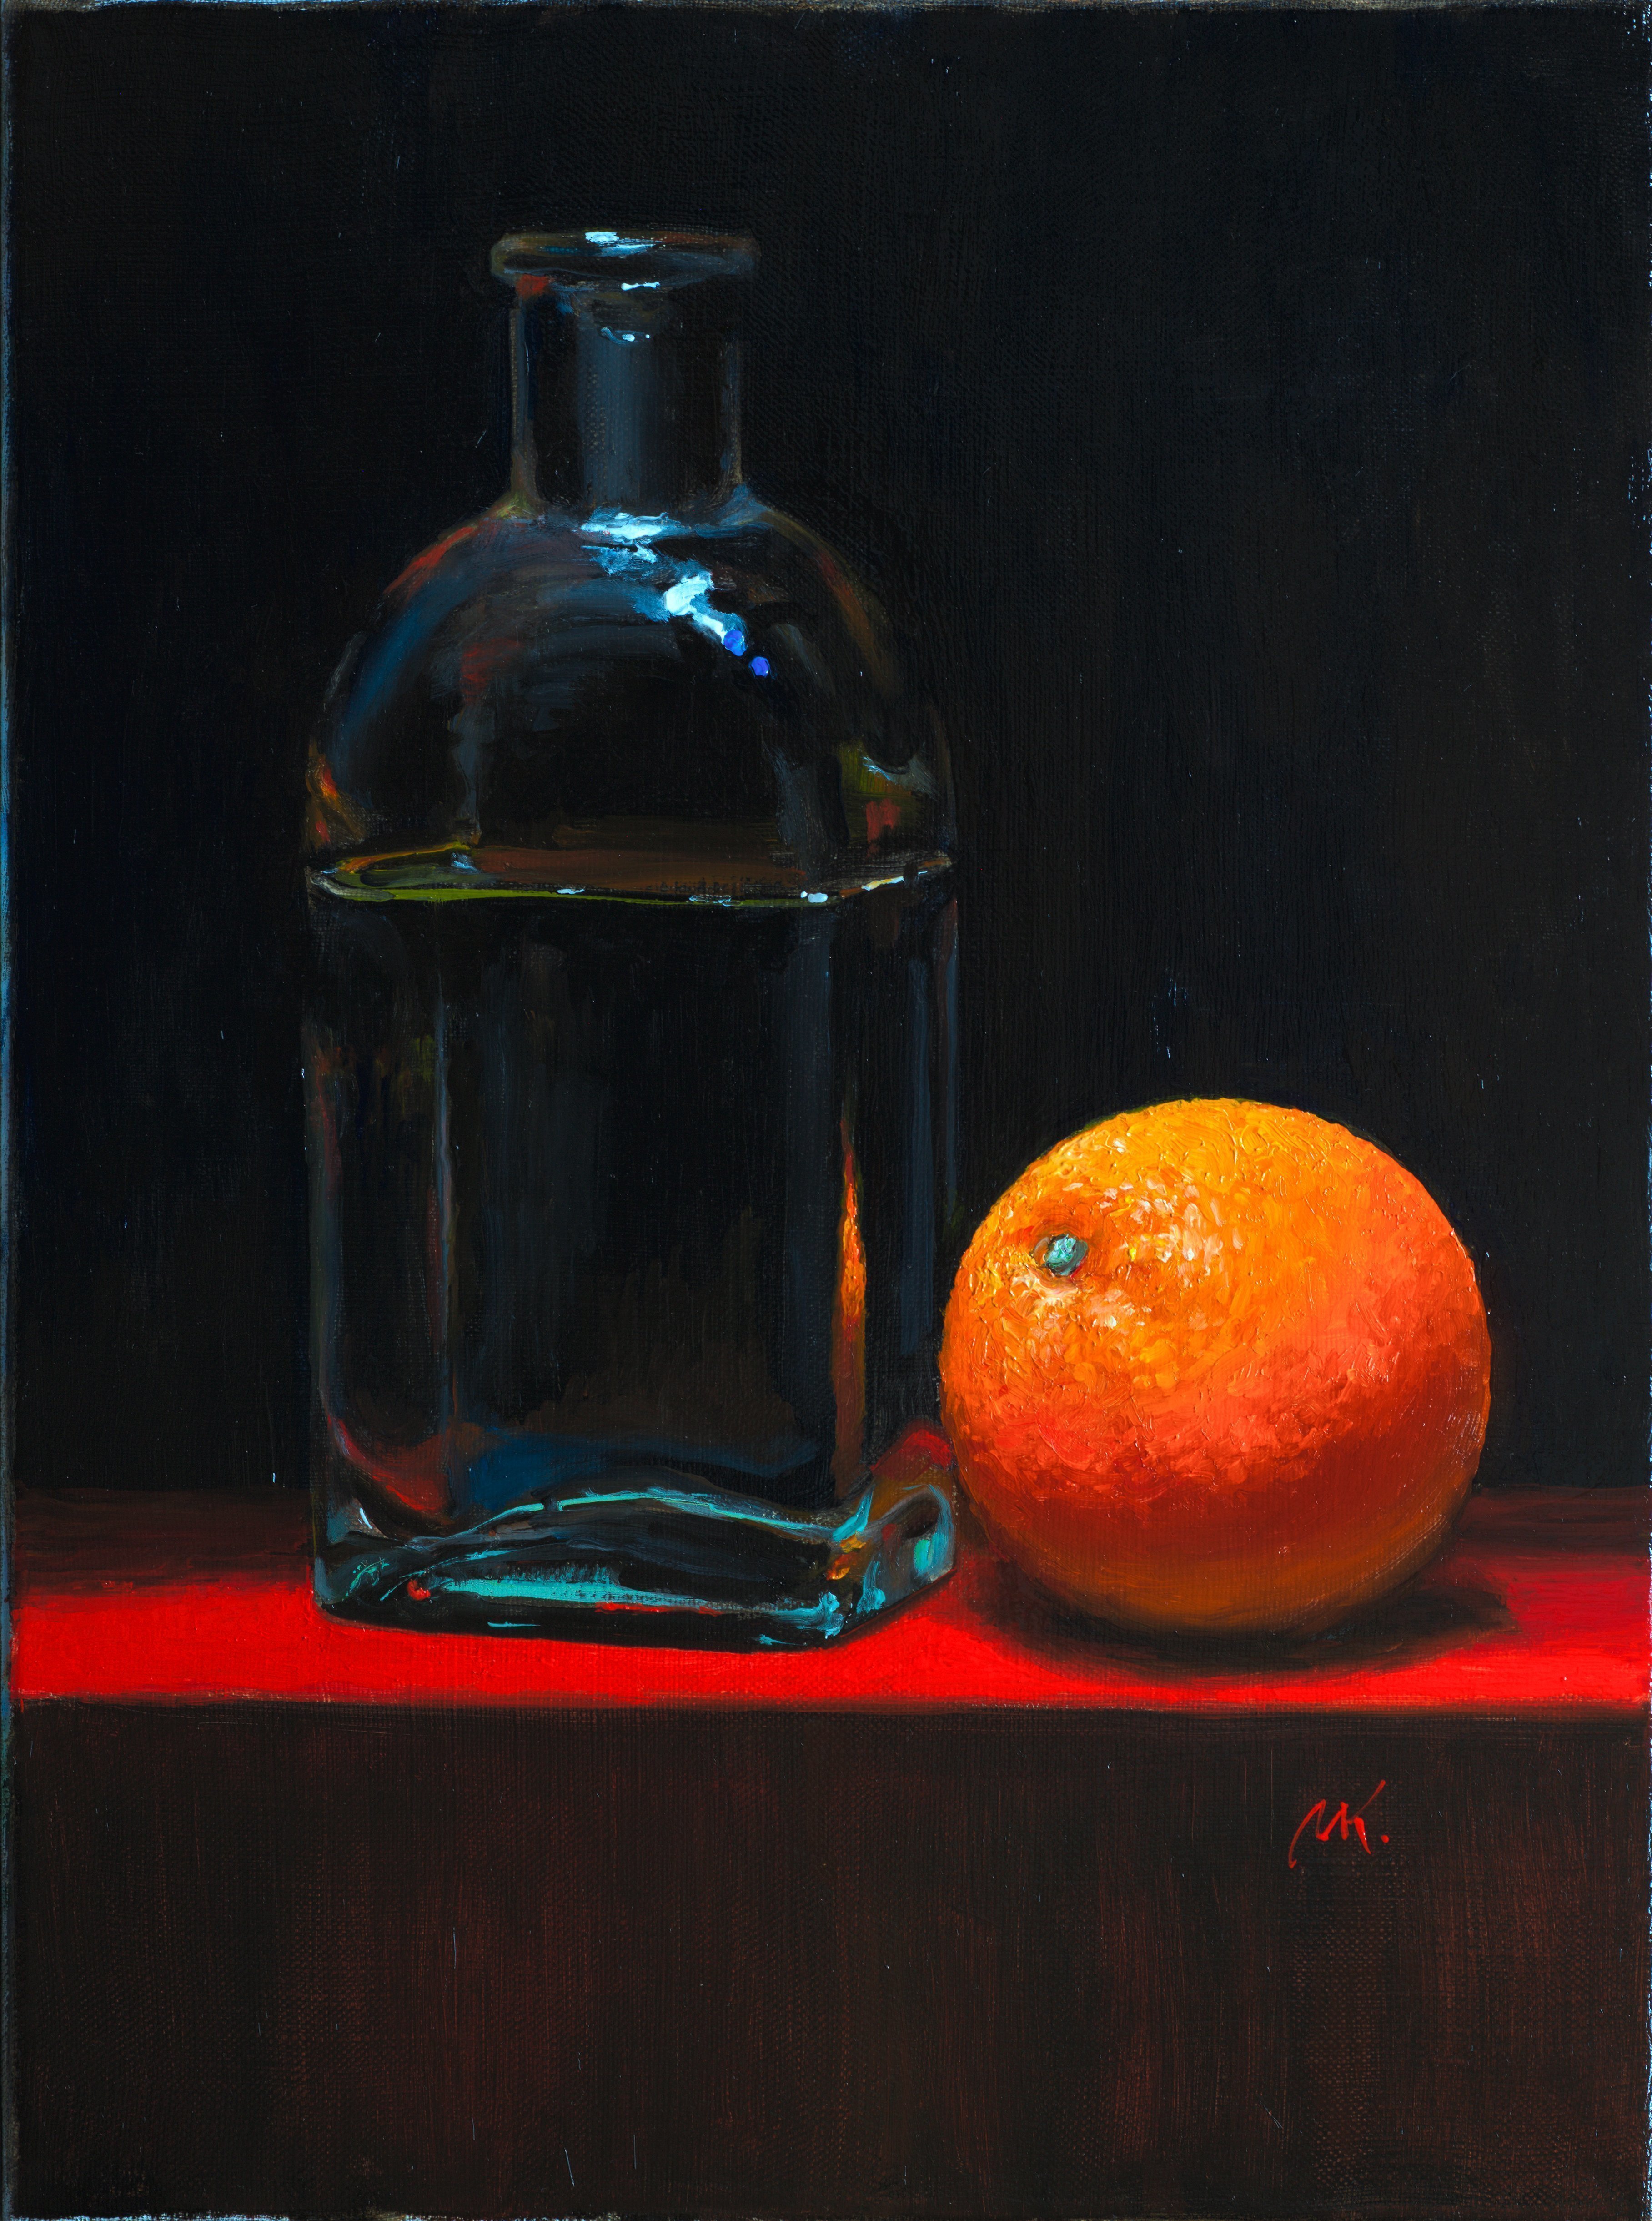 Mikhail Velavok; Orange, 2017, Original Painting Oil, 11.8 x 15.7 inches. Artwork description: 241 Original oil on canvas stretched on a wooden underframe. The artwork is being sold unframed. The frame in the additional photo is an example only.orange, red, dark, glass, bottle...